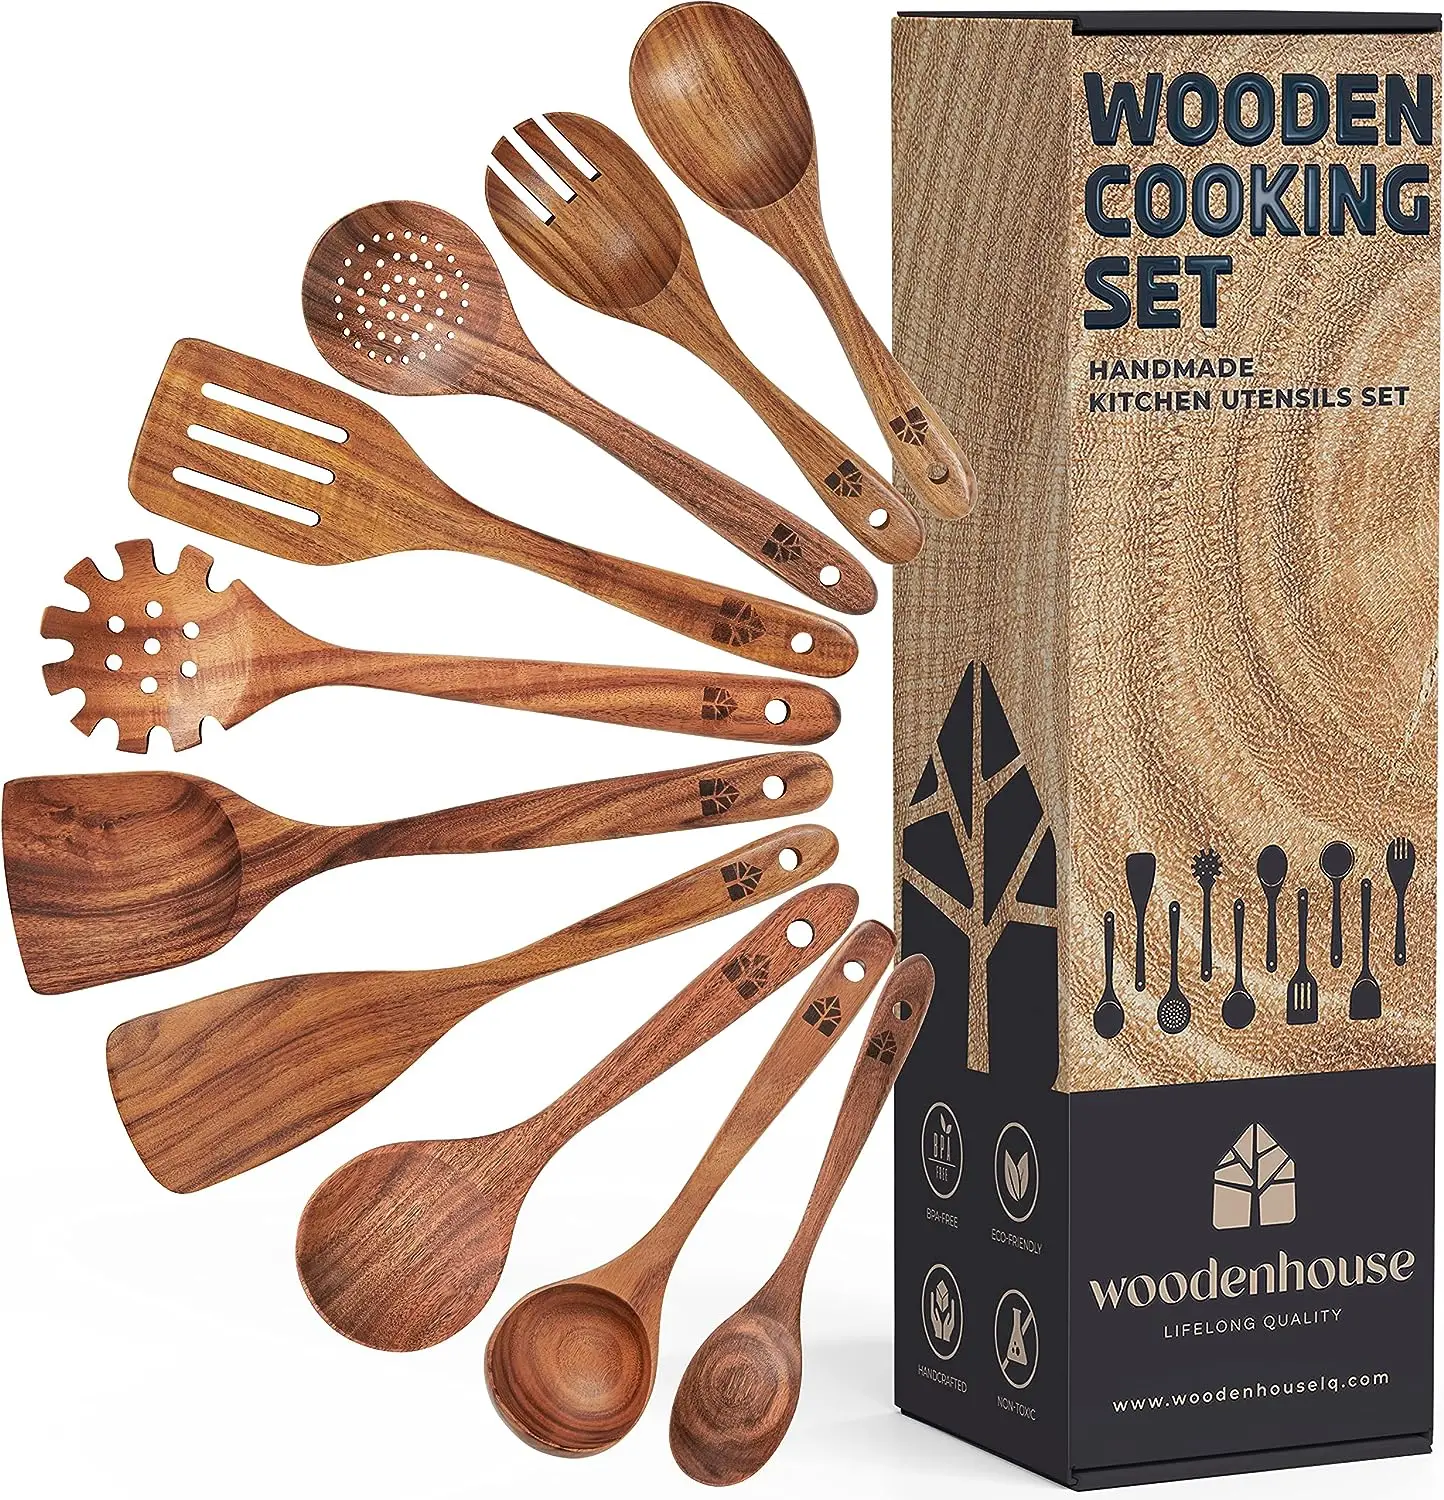 

Spoons for Cooking, 10 Pcs Teak Wood Cooking Utensil Set - Wooden Kitchen Utensils for Nonstick Pans & Cookware - Sturdy, Li